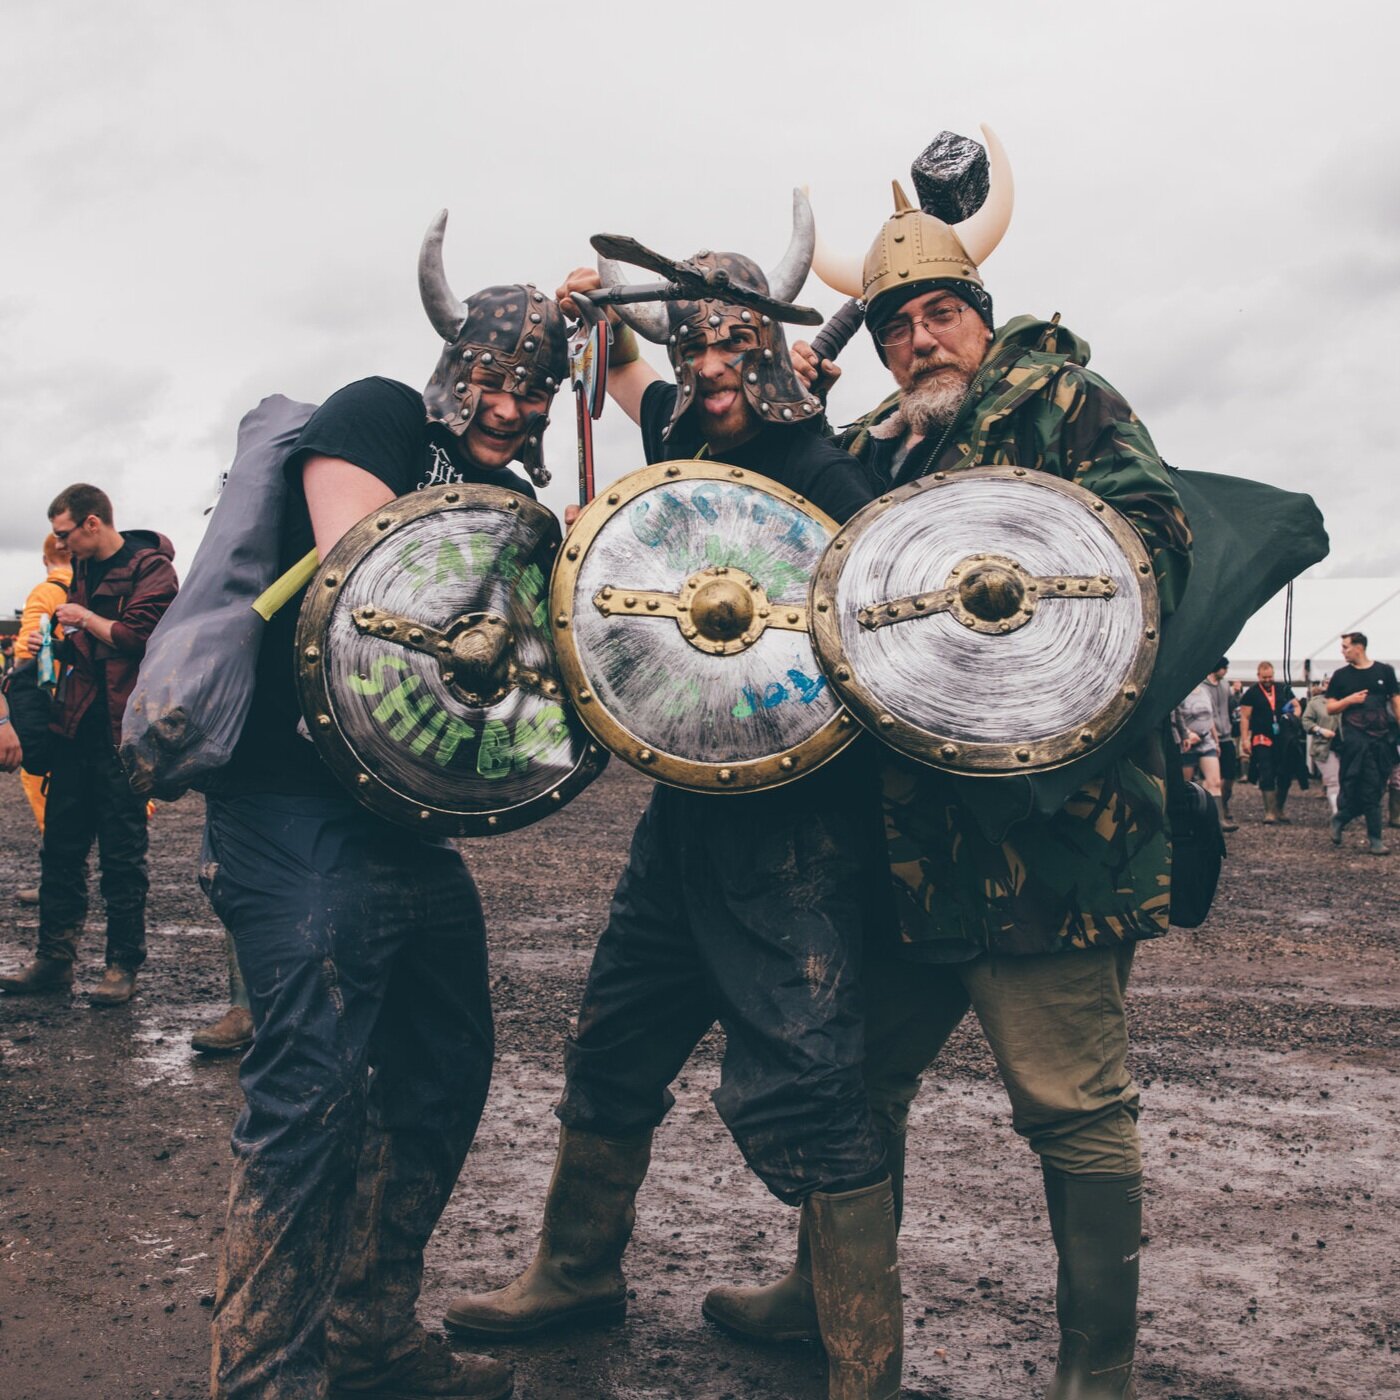 THE HAIR METAL FANS OF DOWNLOAD FEST 2019